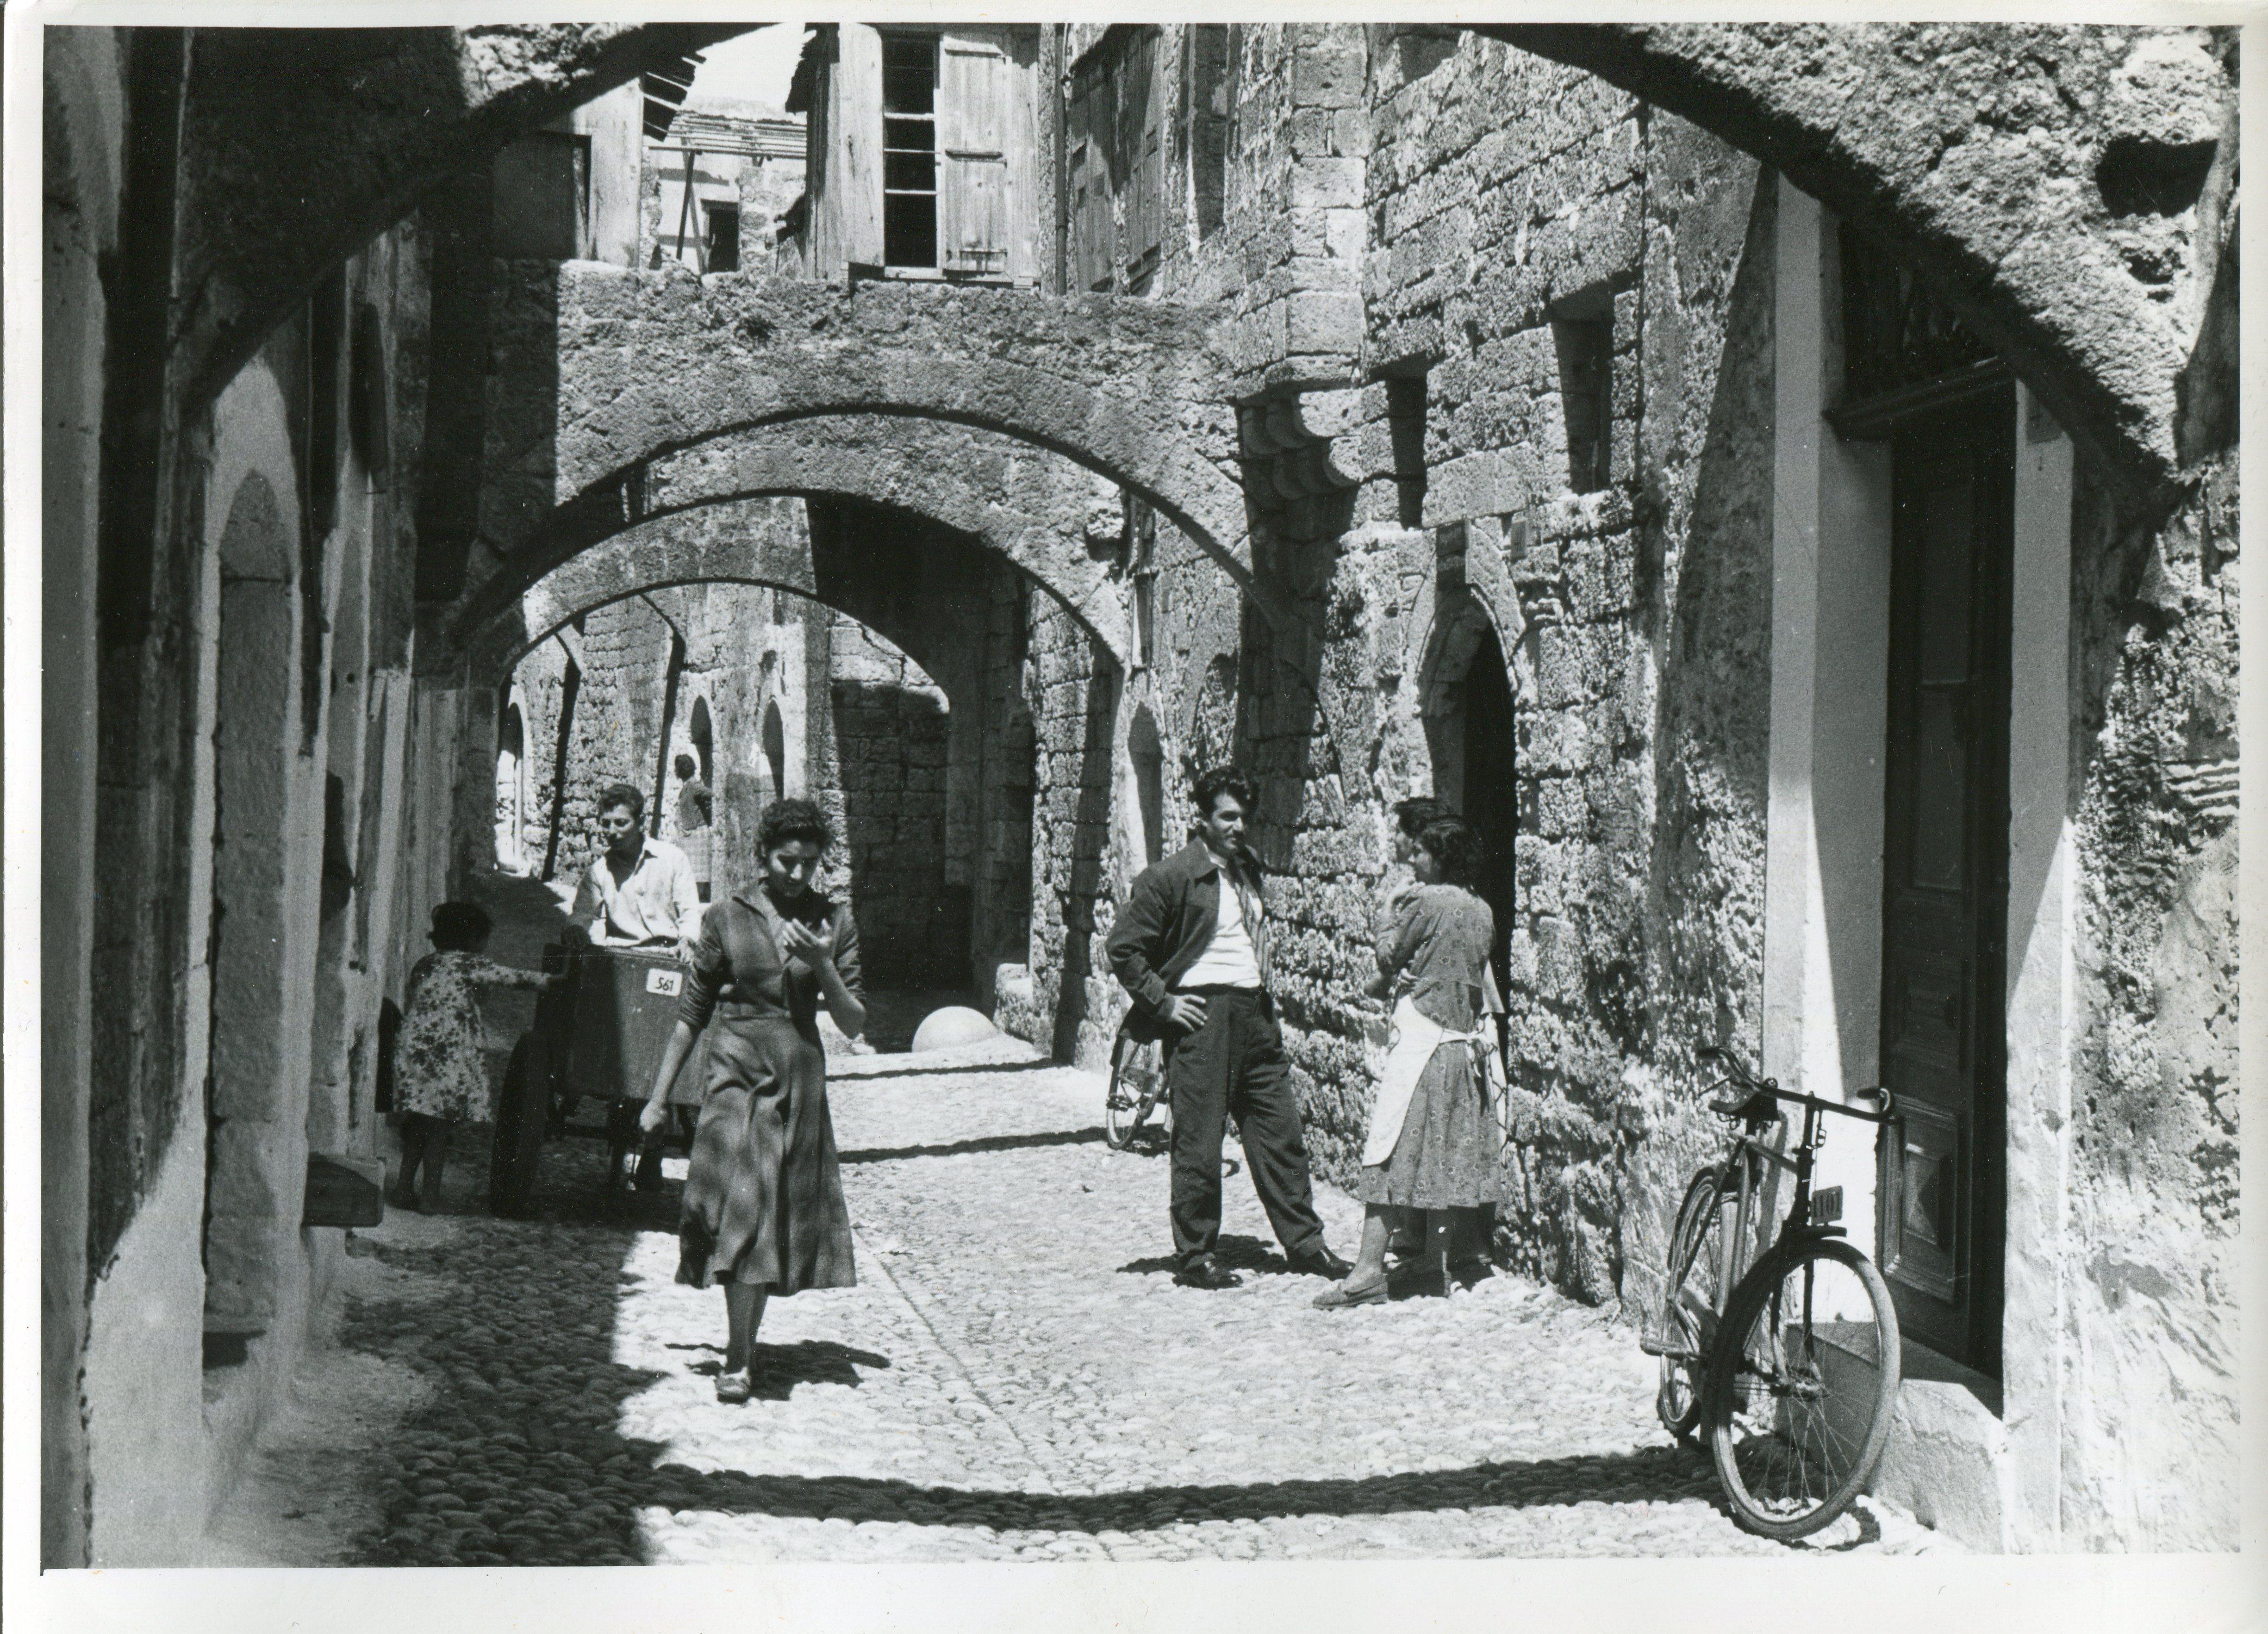 Erich Andres Black and White Photograph - Rhodos, Greece 1955